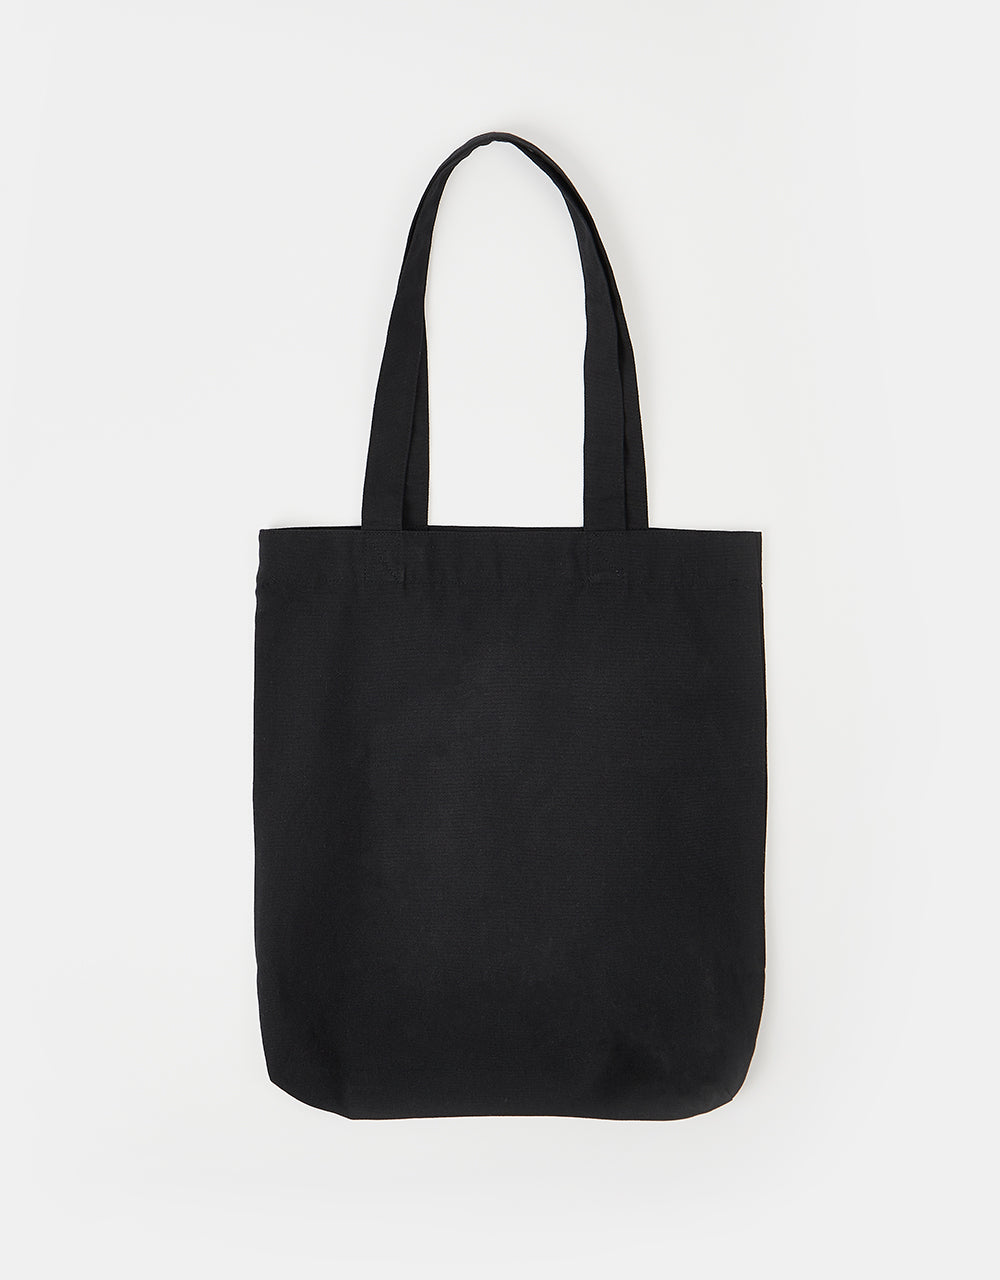 Route One Recycled Face The Music Tote Bag - Black